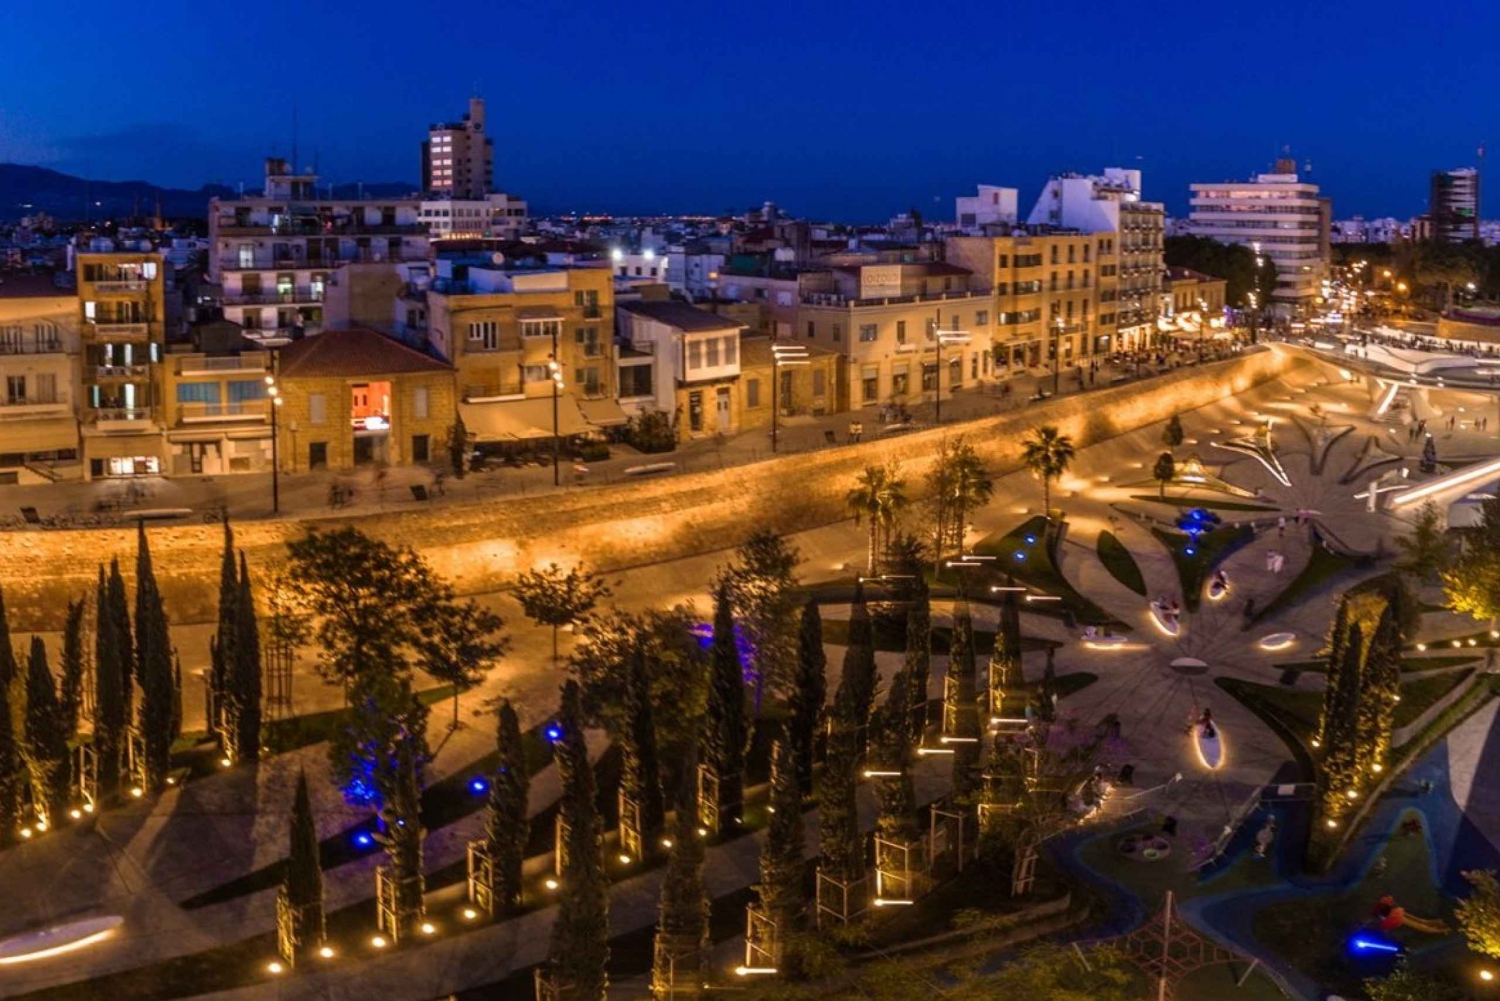 From Paphos: Nicosia Sightseeing Tour with Hotel Transfer